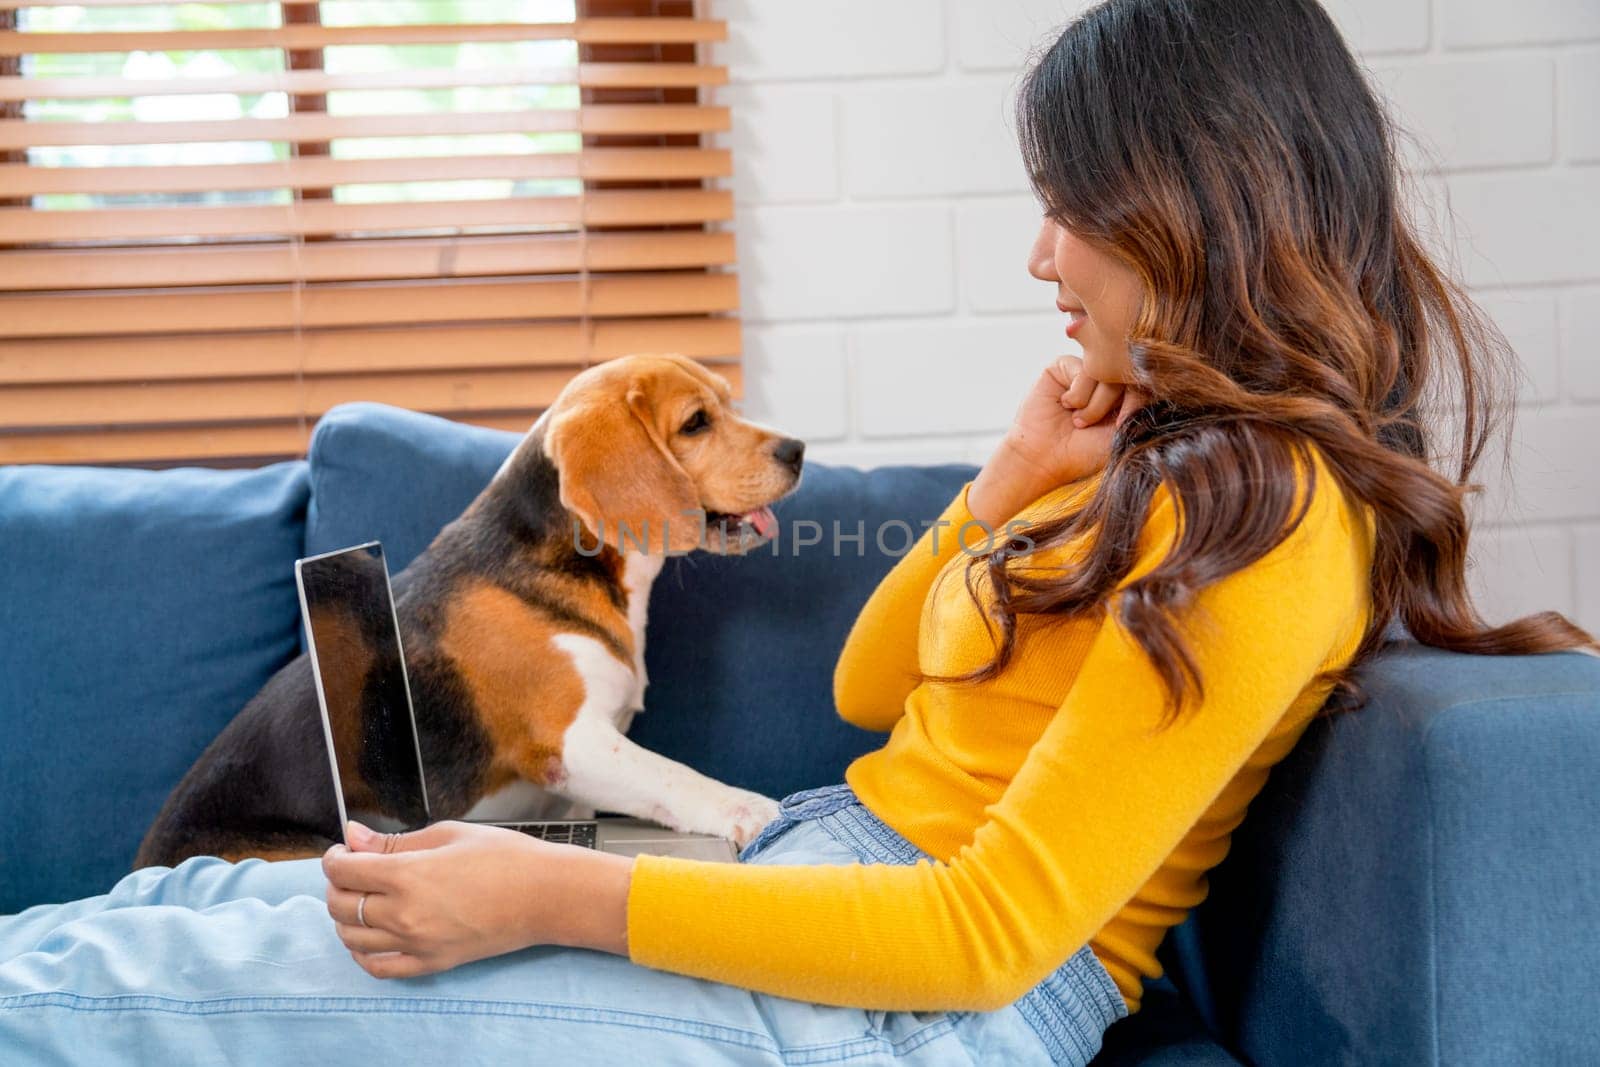 Beagle dog play fun with young Asian girl on sofa during the girl work with laptop.